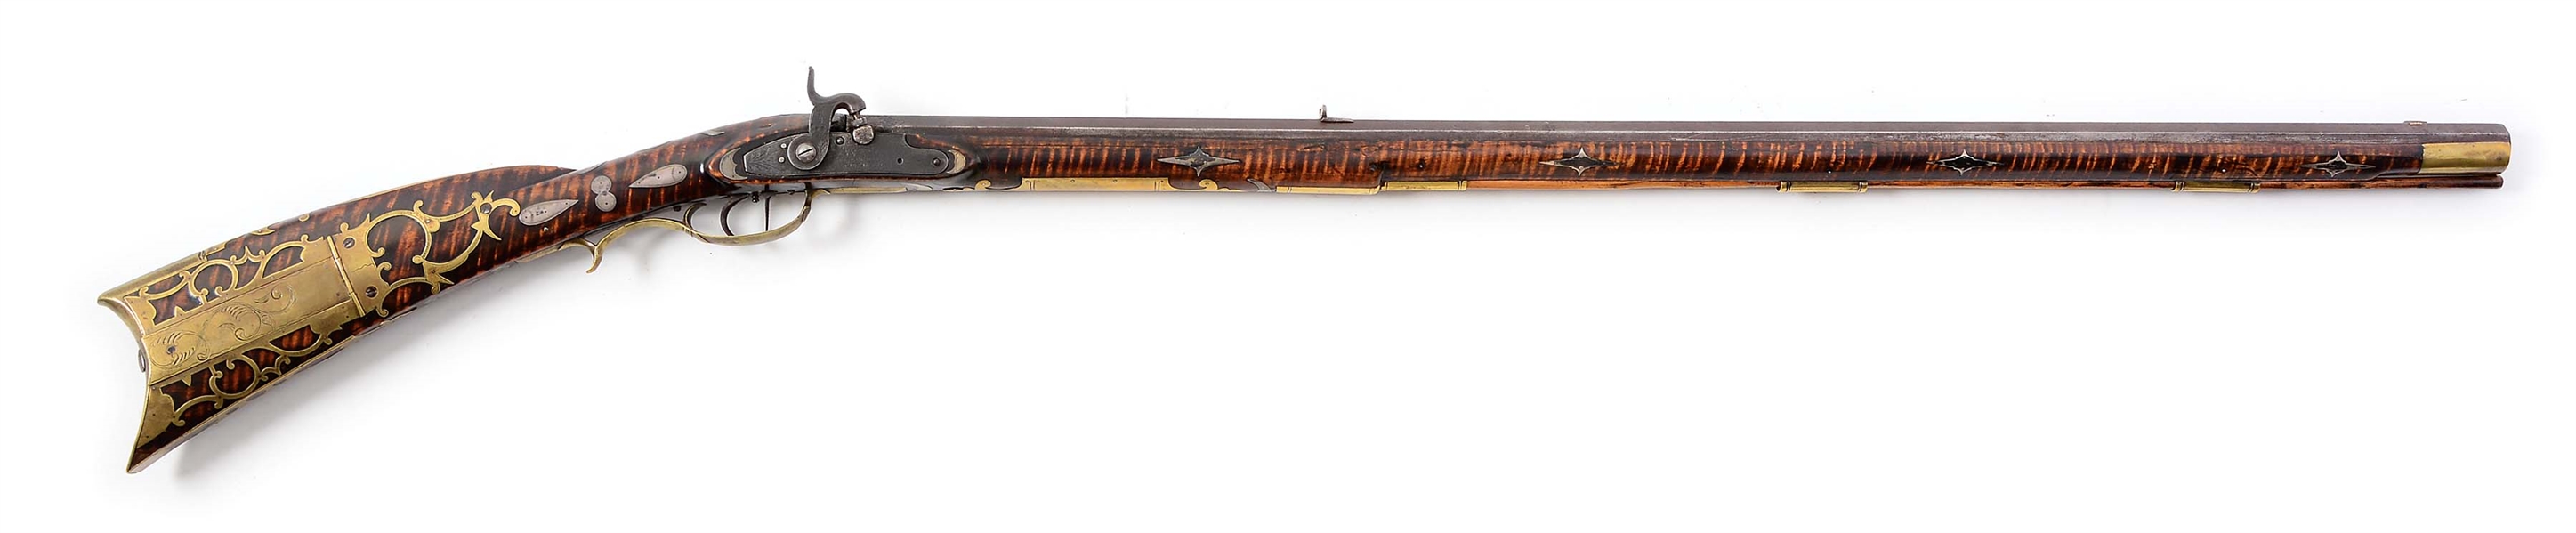 (A) PROFUSELY INLAID AND CARVED FULLSTOCK PERCUSSION KENTUCKY RIFLE BY SAMUEL BAUM.